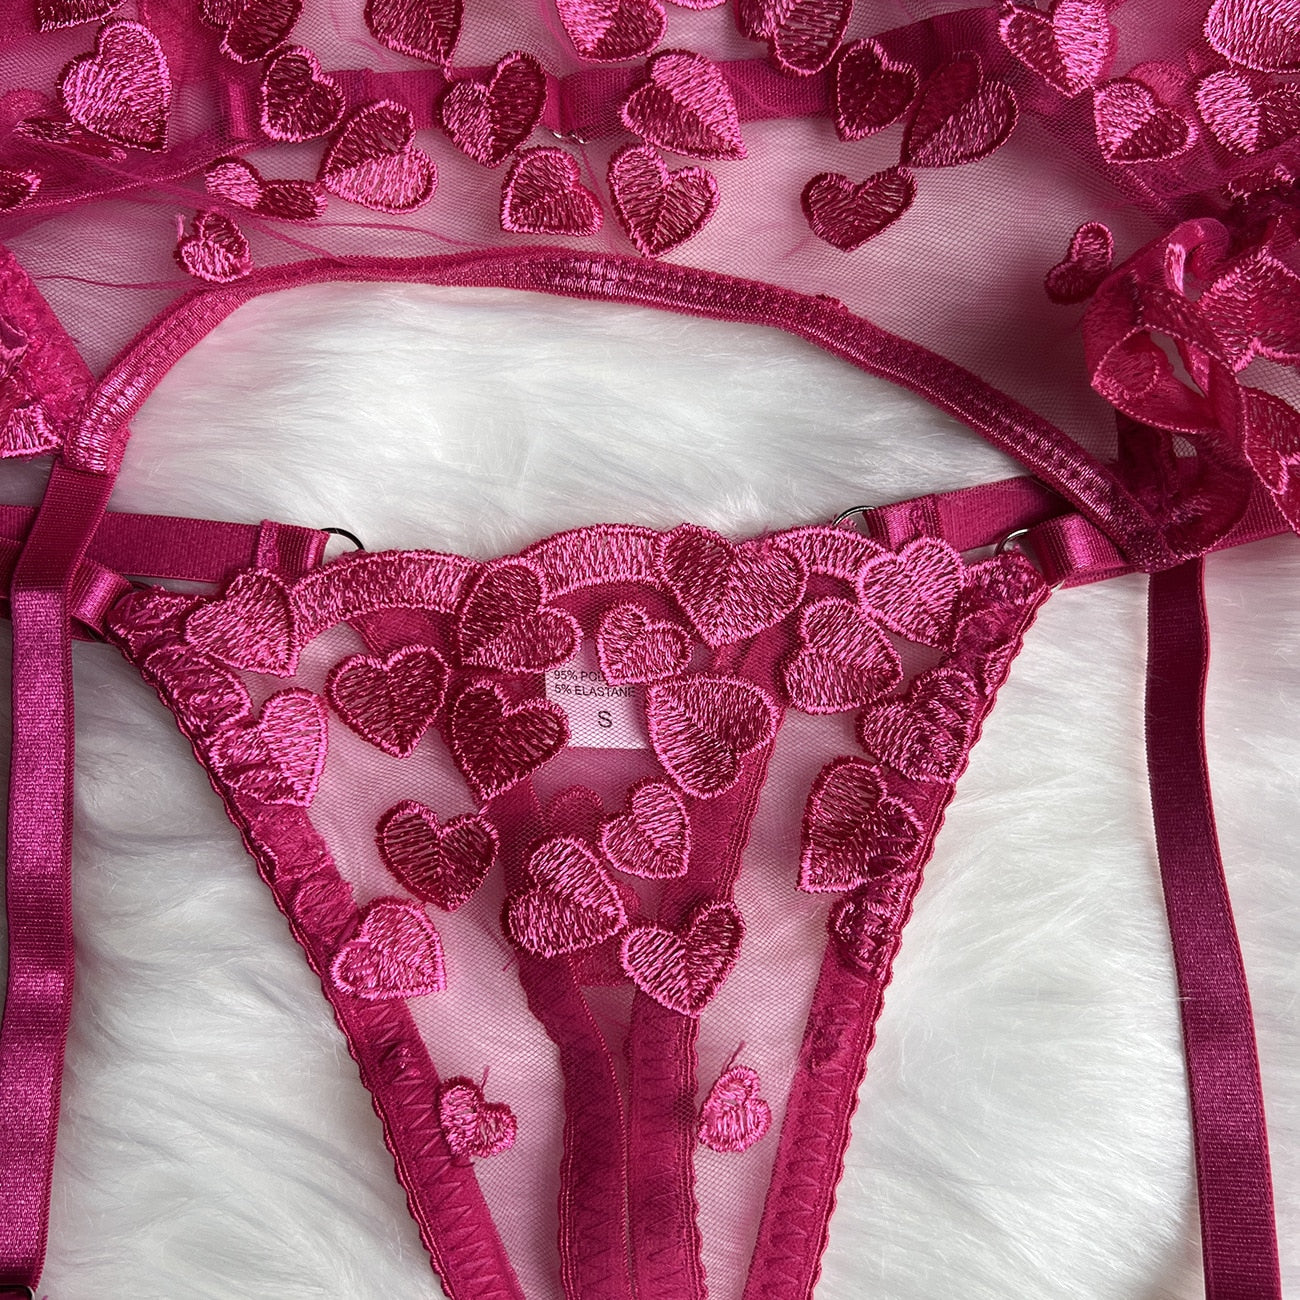 4-Piece Heart Embroidery Sexy Lingerie Set Ruched Garter Belt Erotic Lingerie